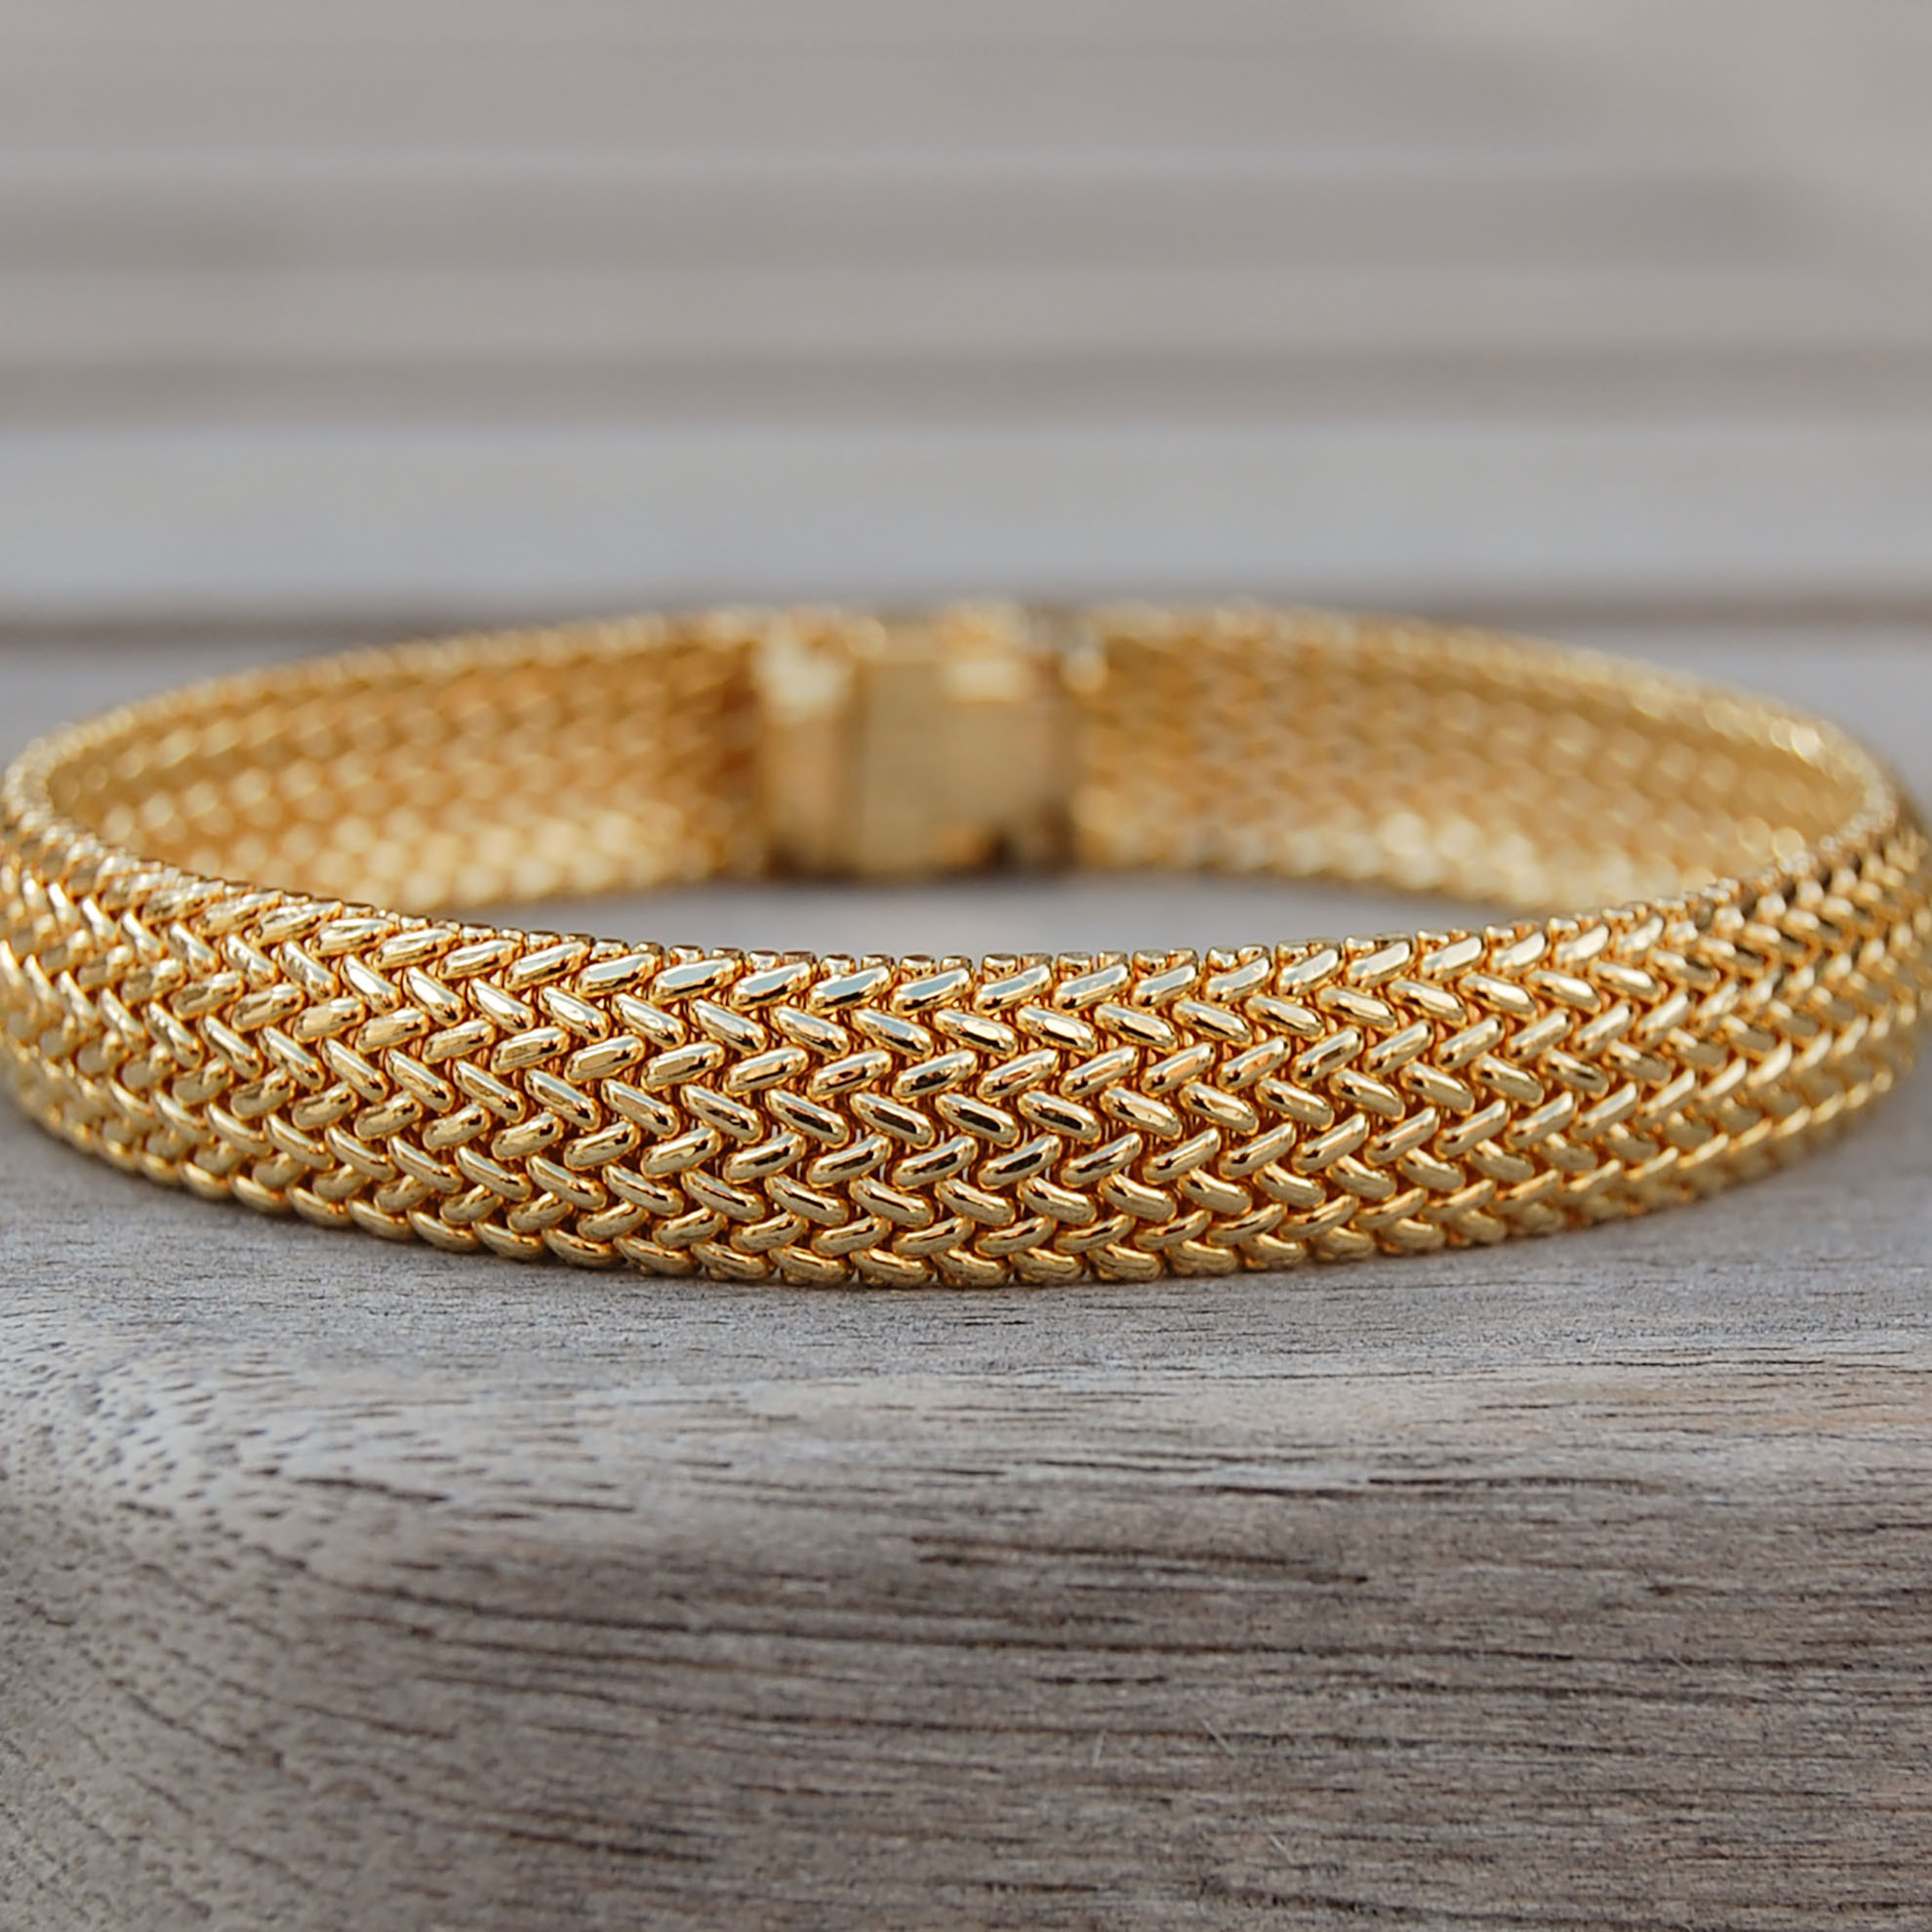 Estate Jewelry 18k Yellow Gold Wide Mesh Necklace - Estate Jewelry